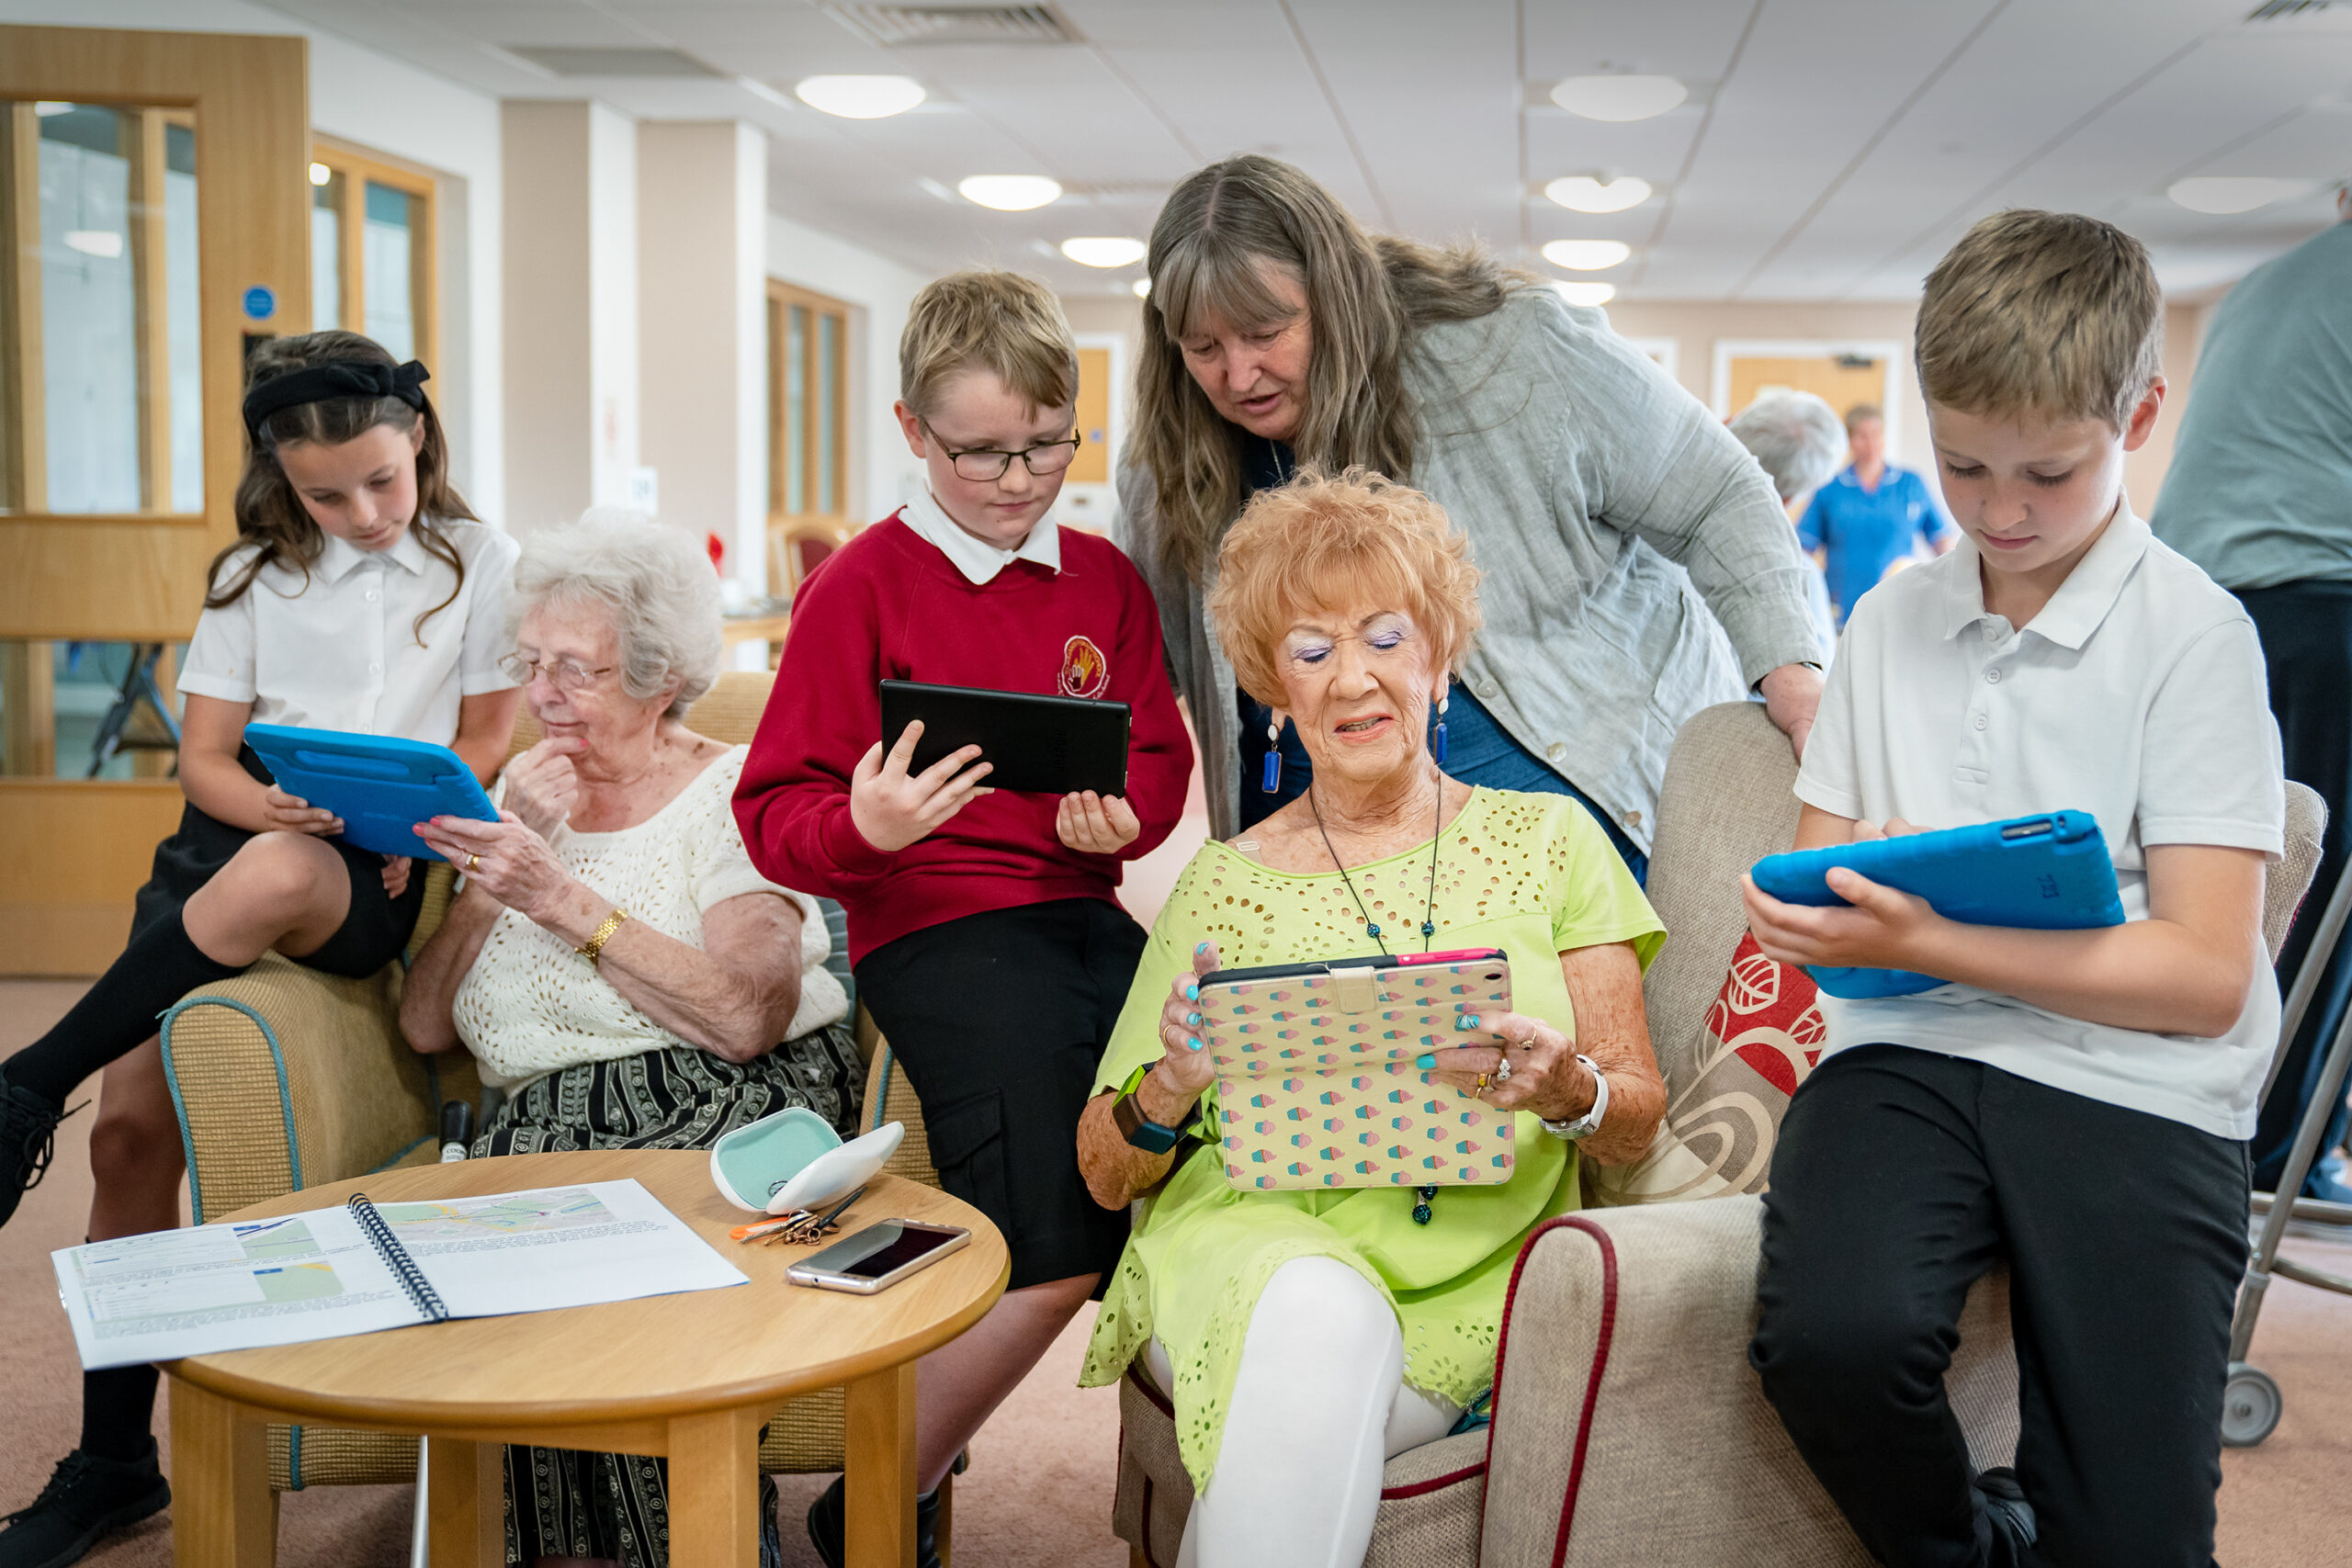 A photograph of three young Digital Heroes in a care home supporting older people to use tablet devices.